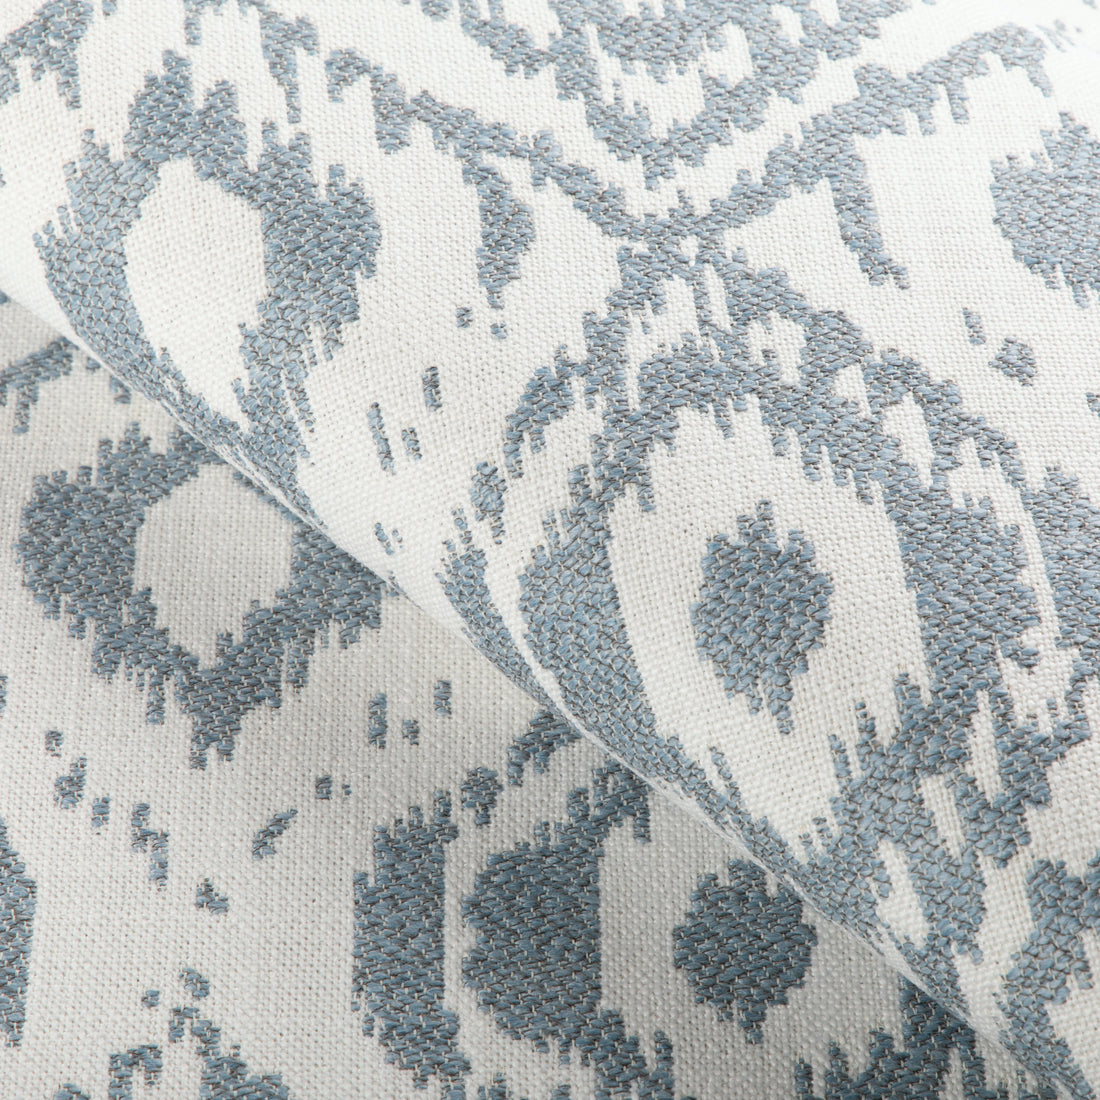 Fabric sample of Milos Damask fabric in sky color - pattern 36921.15.0 - by Kravet Couture in the Riviera collection